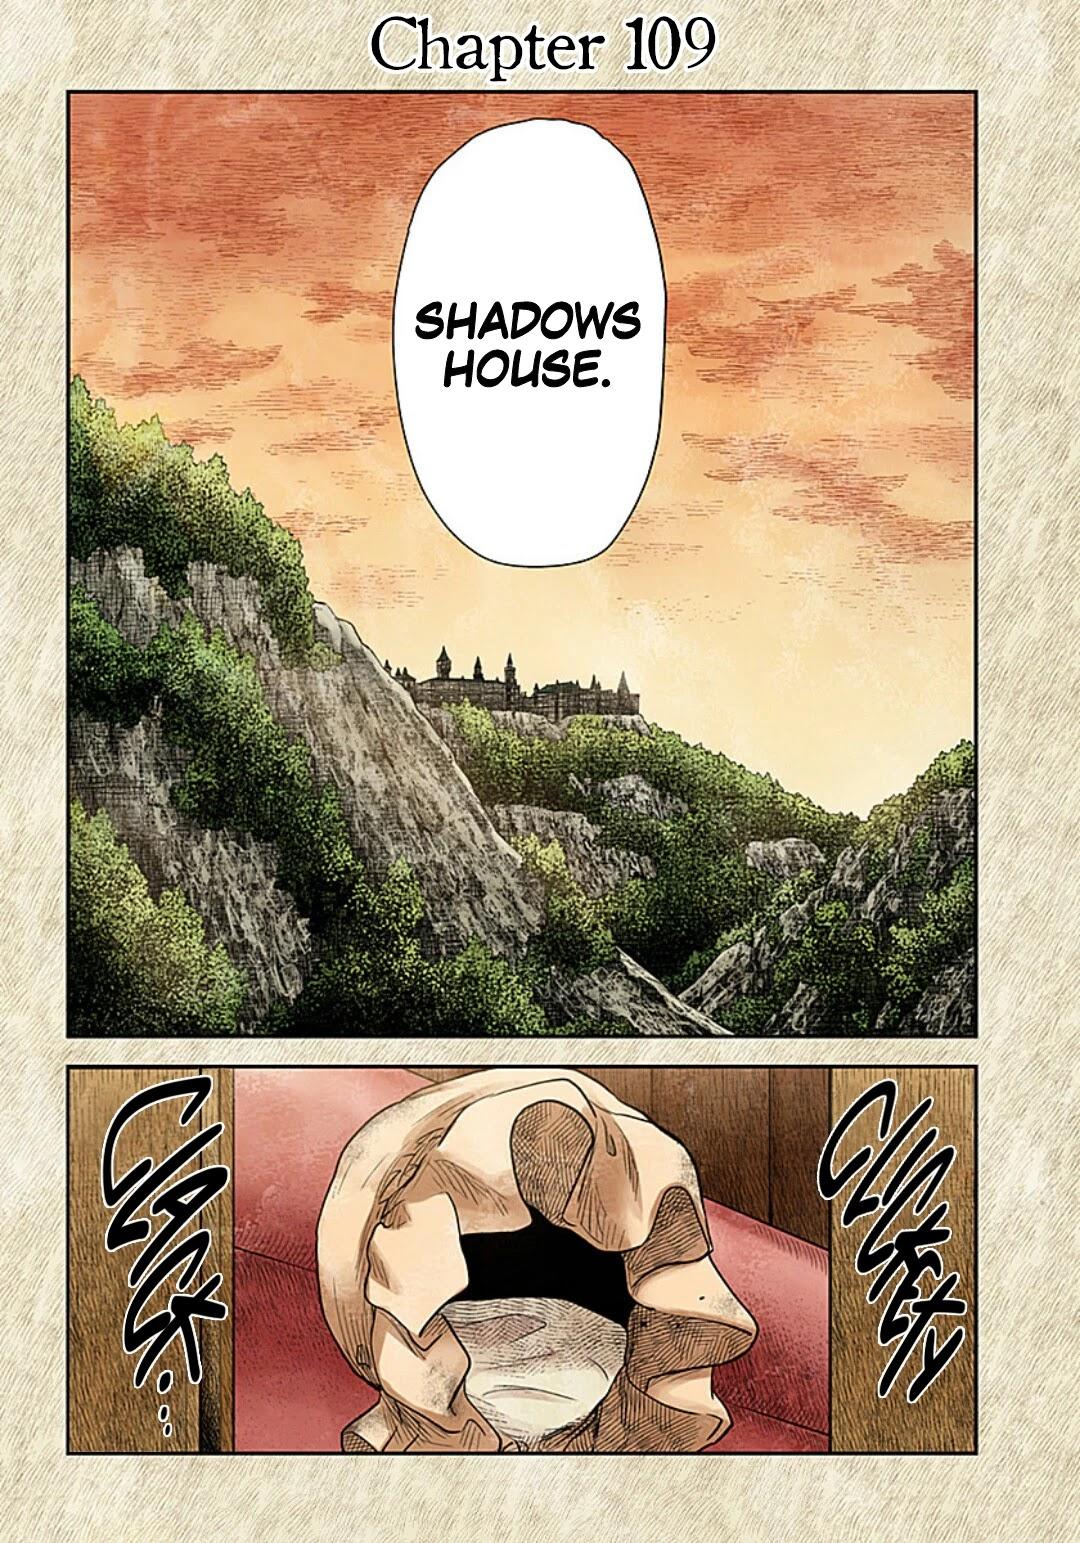 Shadow House Chapter 109: Shadows House page 17 - 